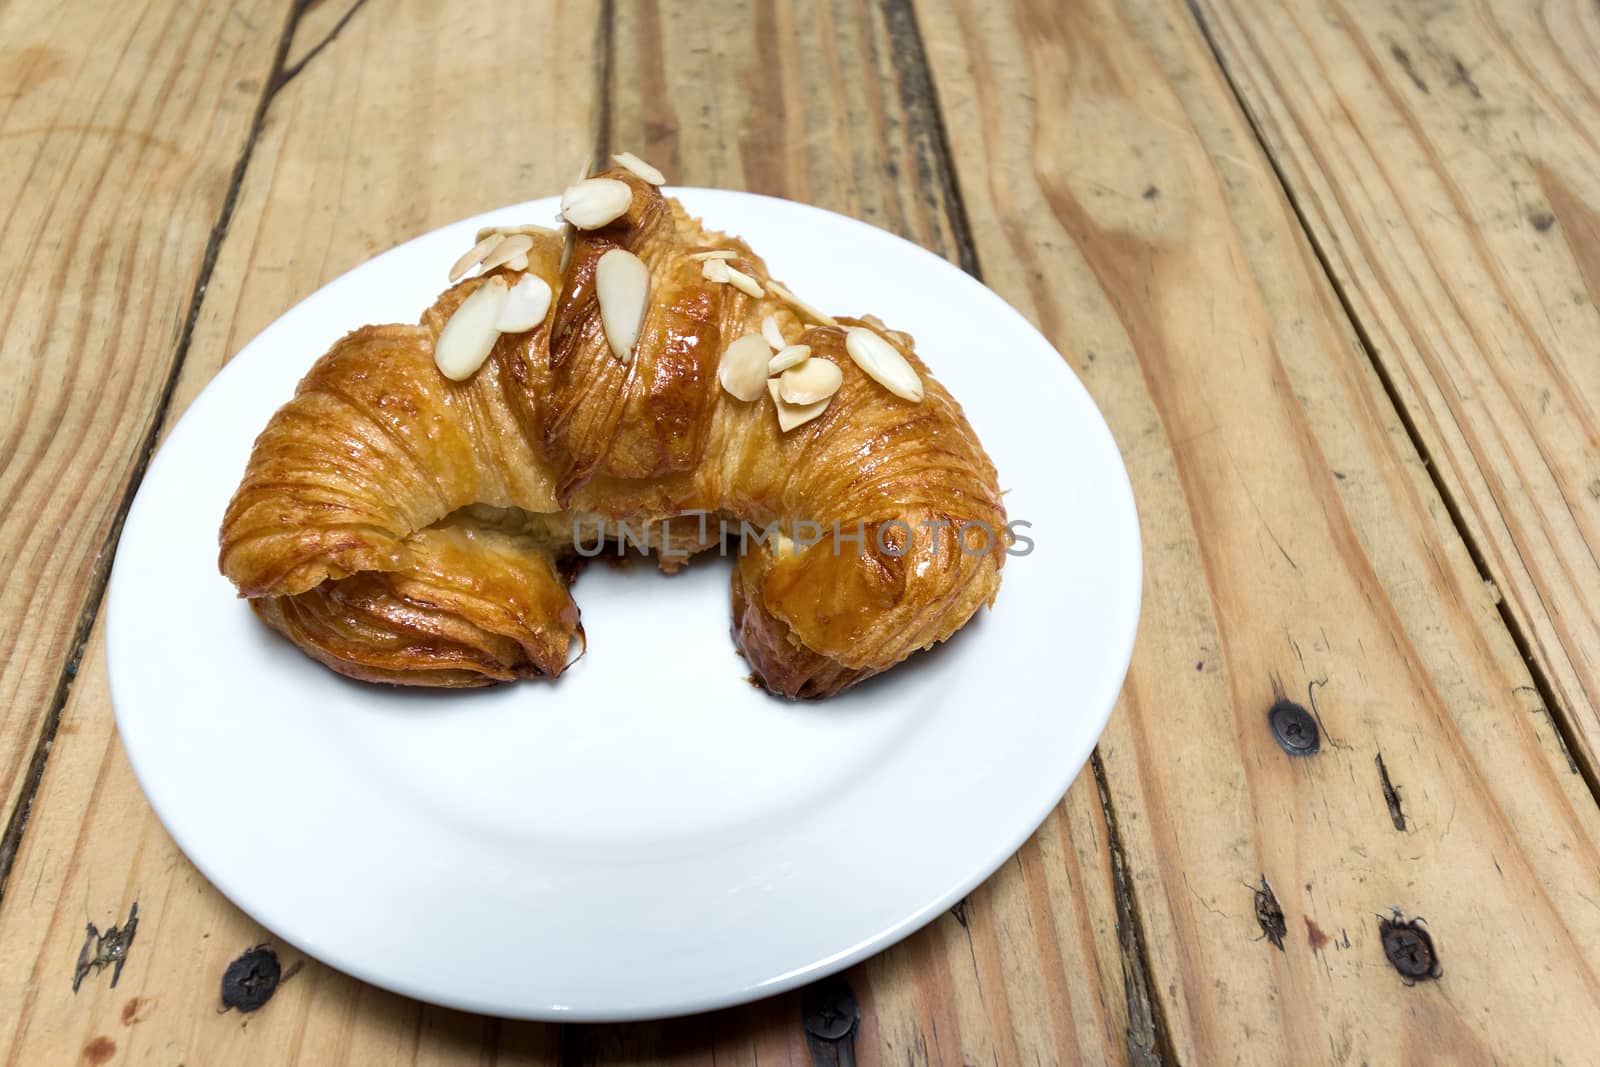 Almond Croissant Pastry on a White Plate on Wood Table